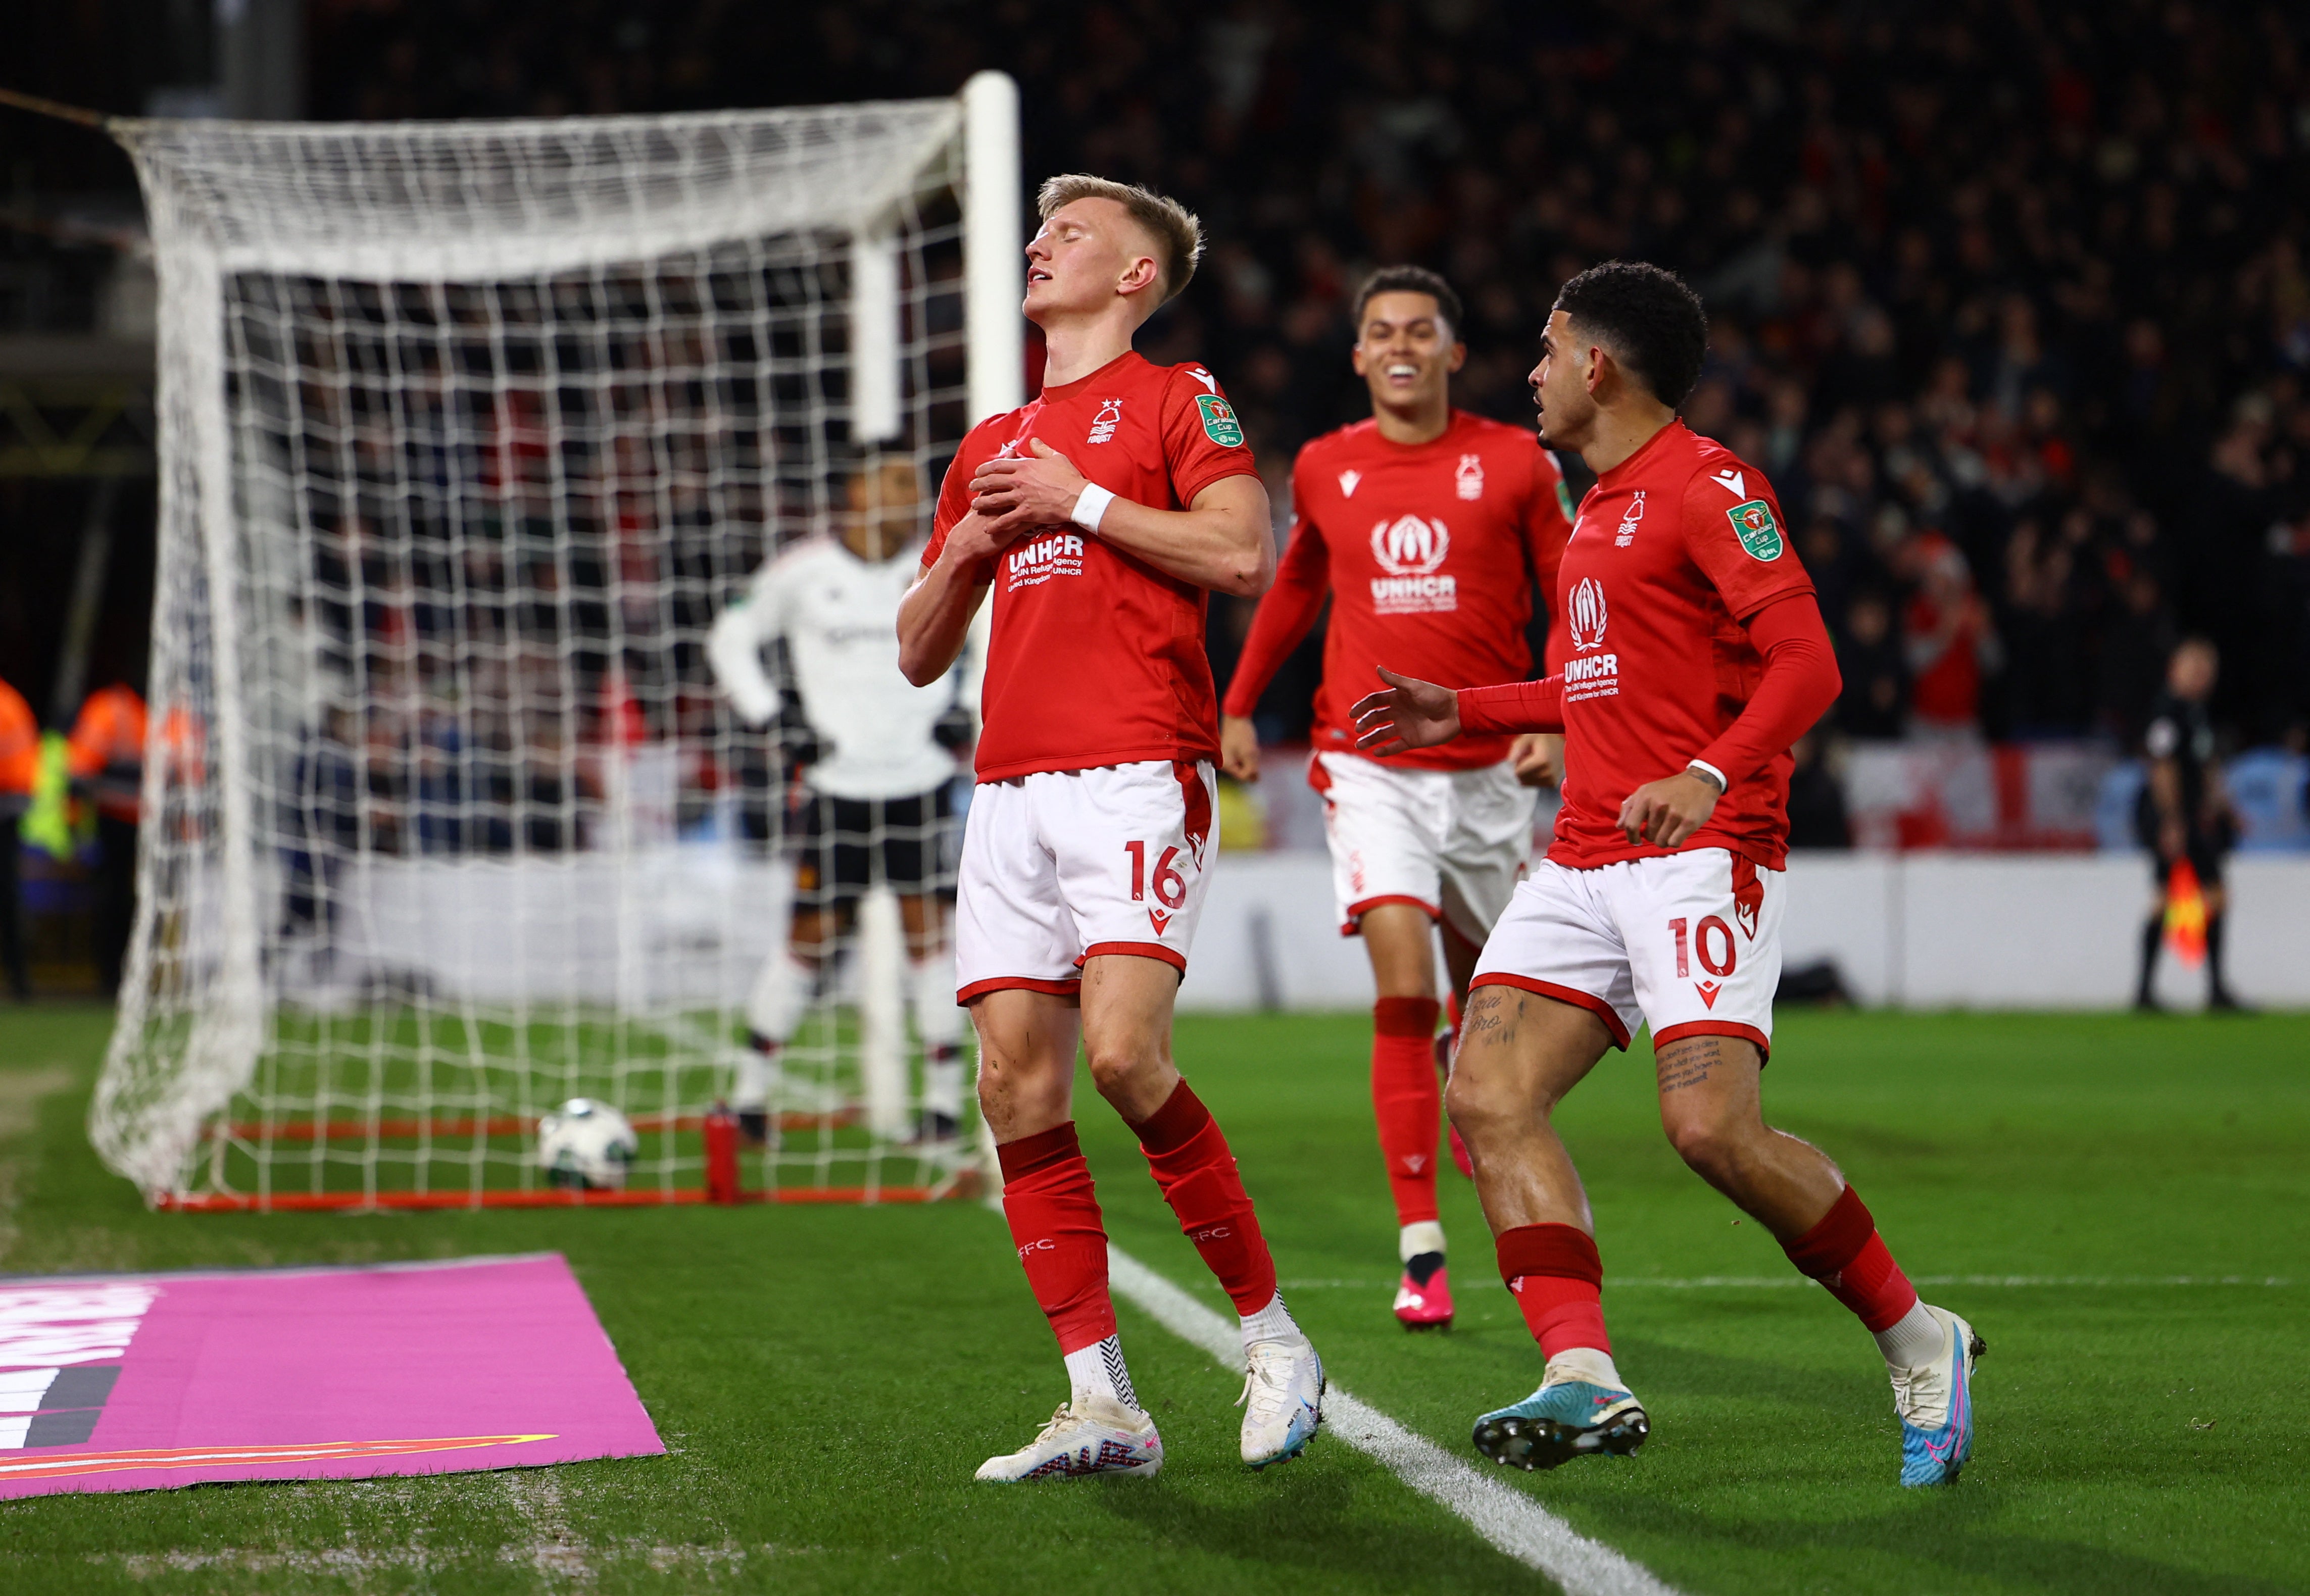 Sam Surridge’s first-half goal was disallowed for Forest but it was a long night for them